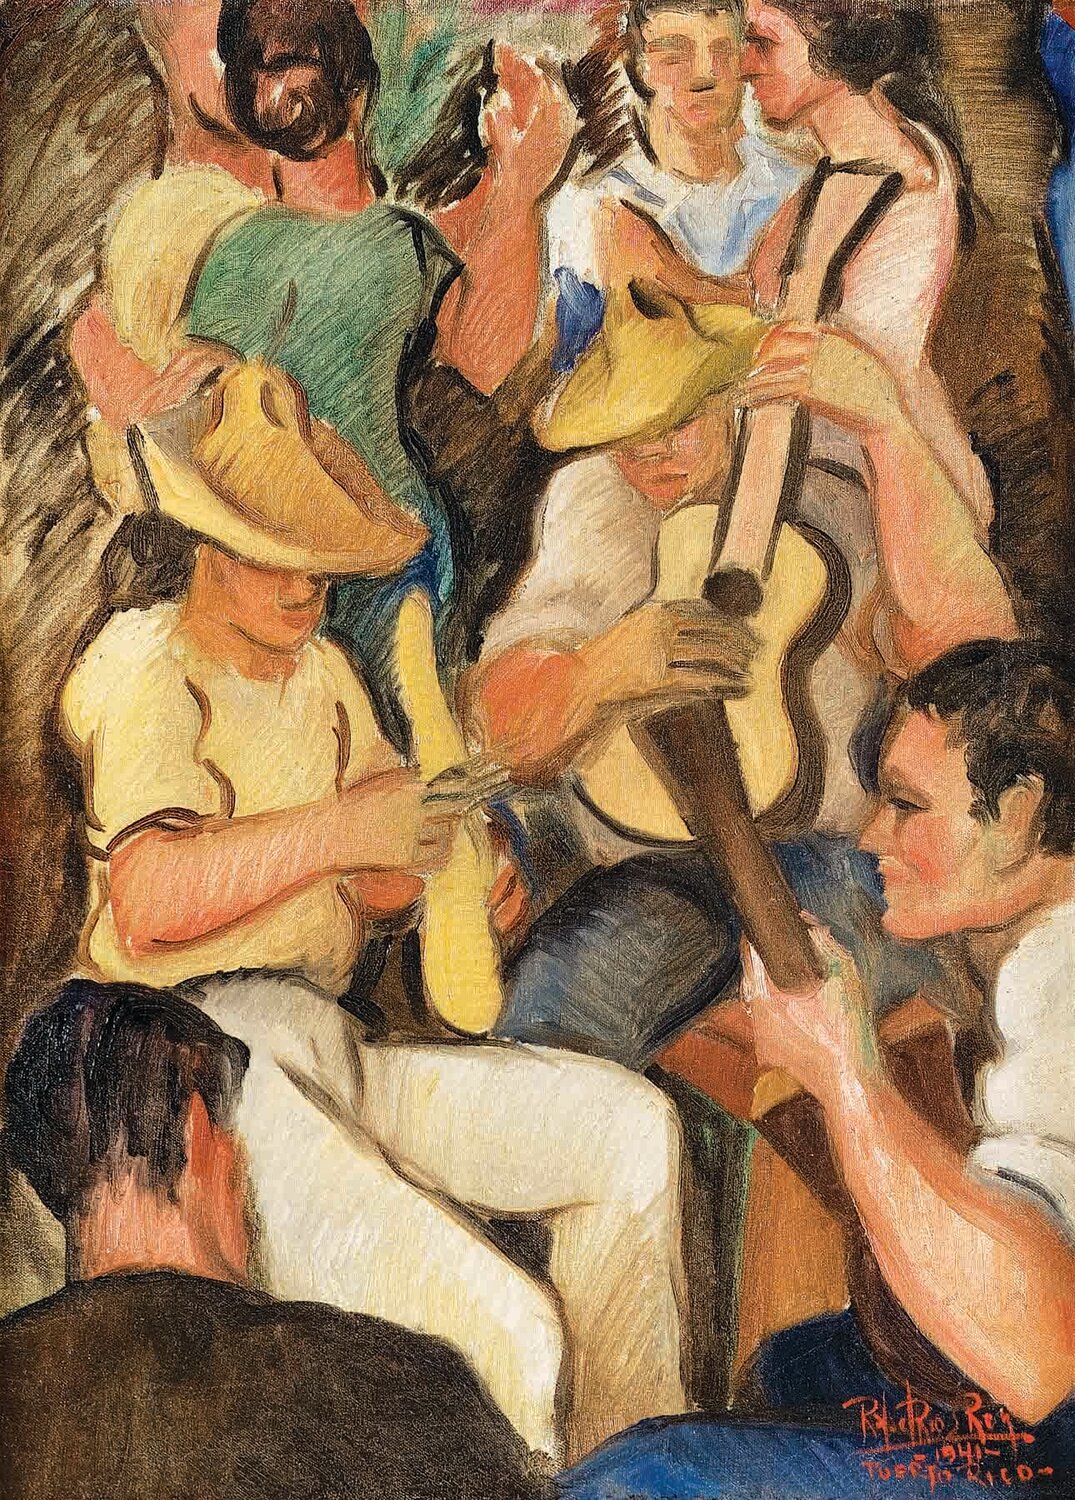 “Party during the Christmas Season / La parranda,” is a 1941, oil on canvas, by Rafael Ríos Rey (1911-1980), part of “Nostalgia for My Island” from Museo de Arte de Ponce. The Luis A. Ferré Foundation, Inc. Gift of Luis A. Ferré.